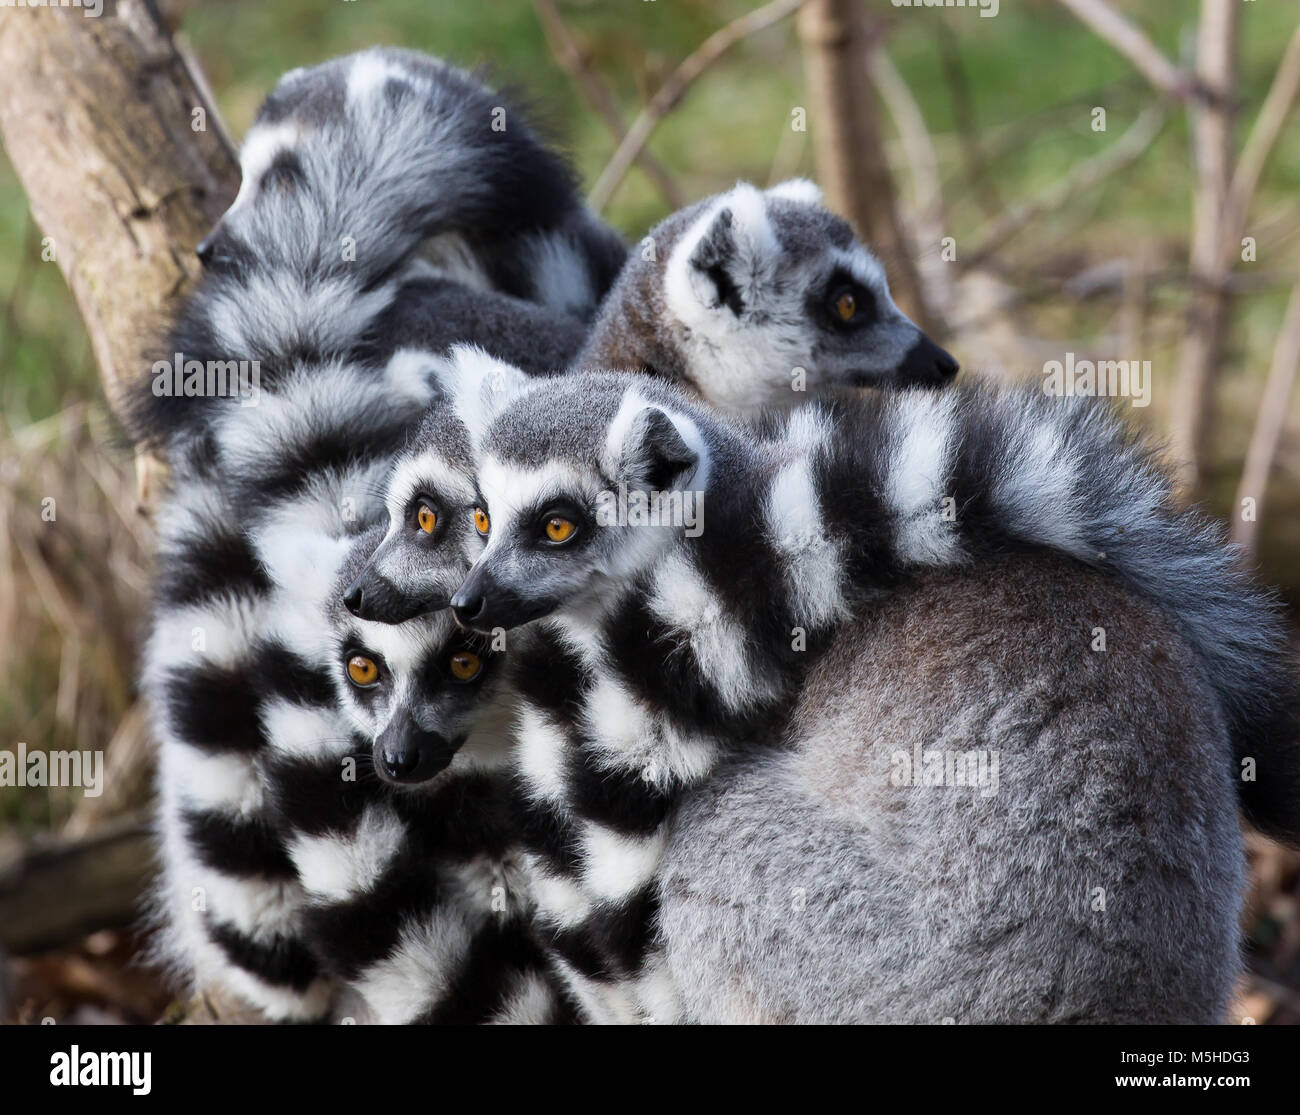 Close up of troop, conspiracy, congress of cute ring-tailed lemurs (Lemur catta) huddled together. Animals in captivity, West Midland Safari Park, UK. Stock Photo